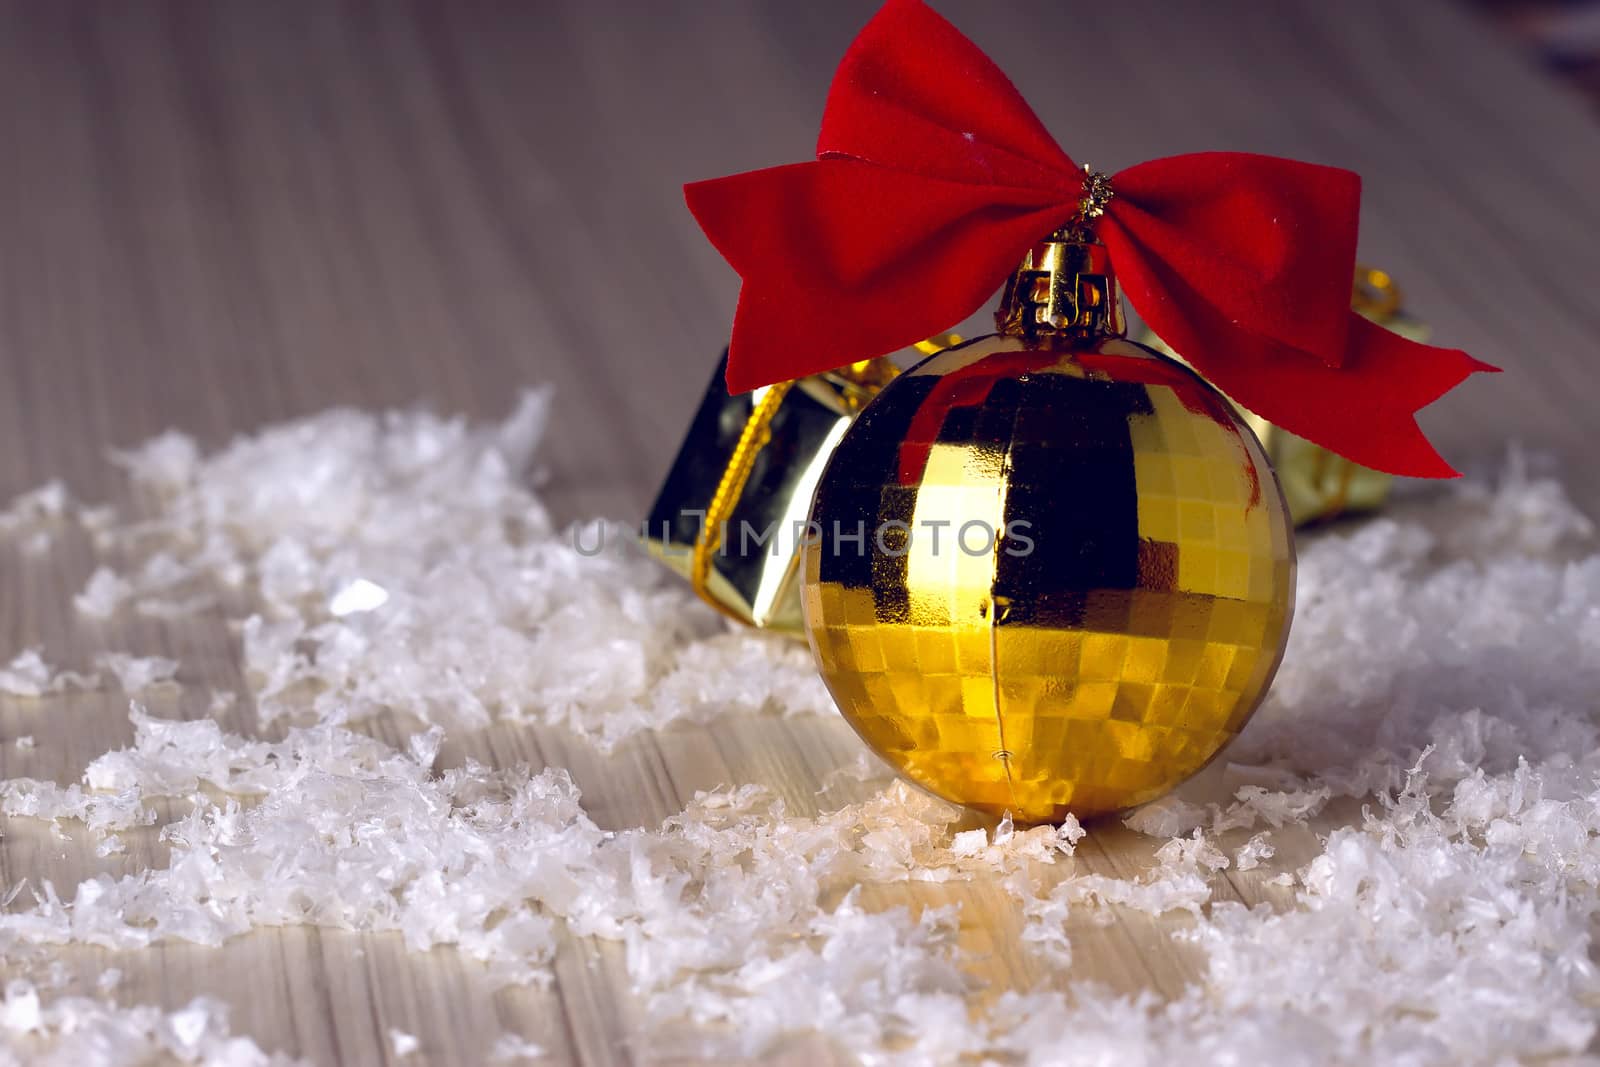 Golden ball with a red bow lying in the snow and beads